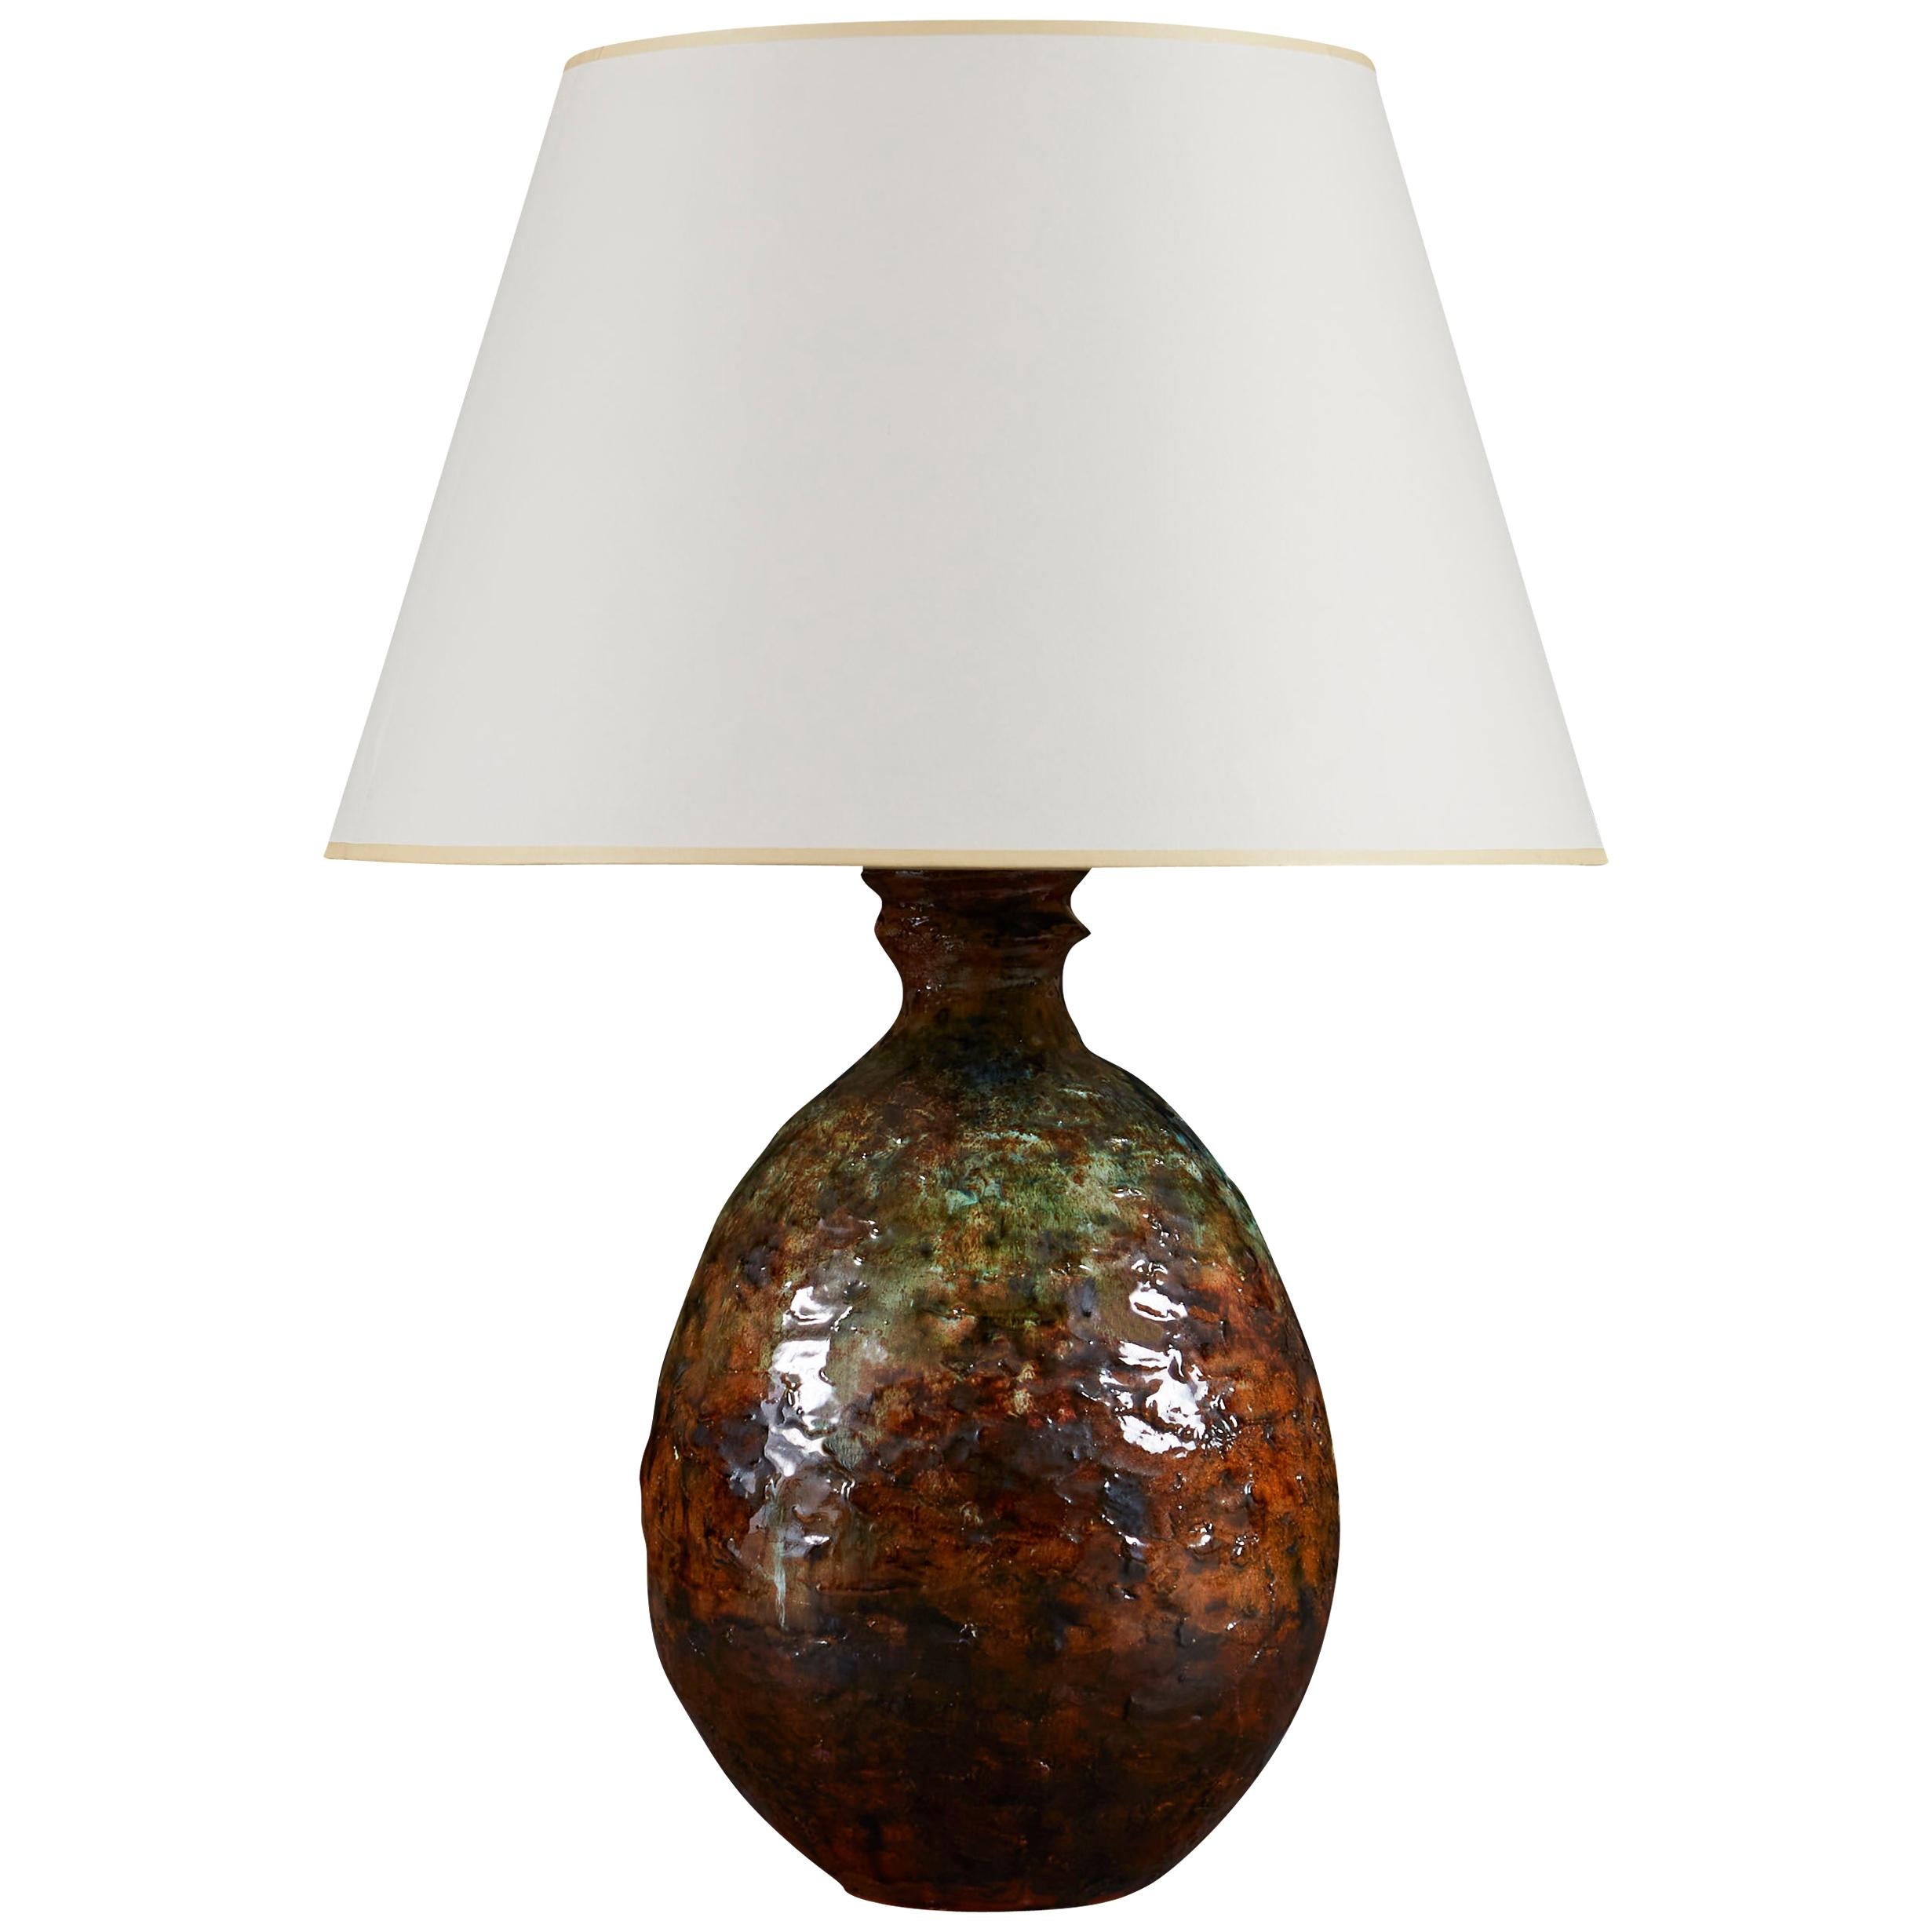 Mid-20th Century Art Pottery Vase as a Table Lamp with Green and Brown Glaze